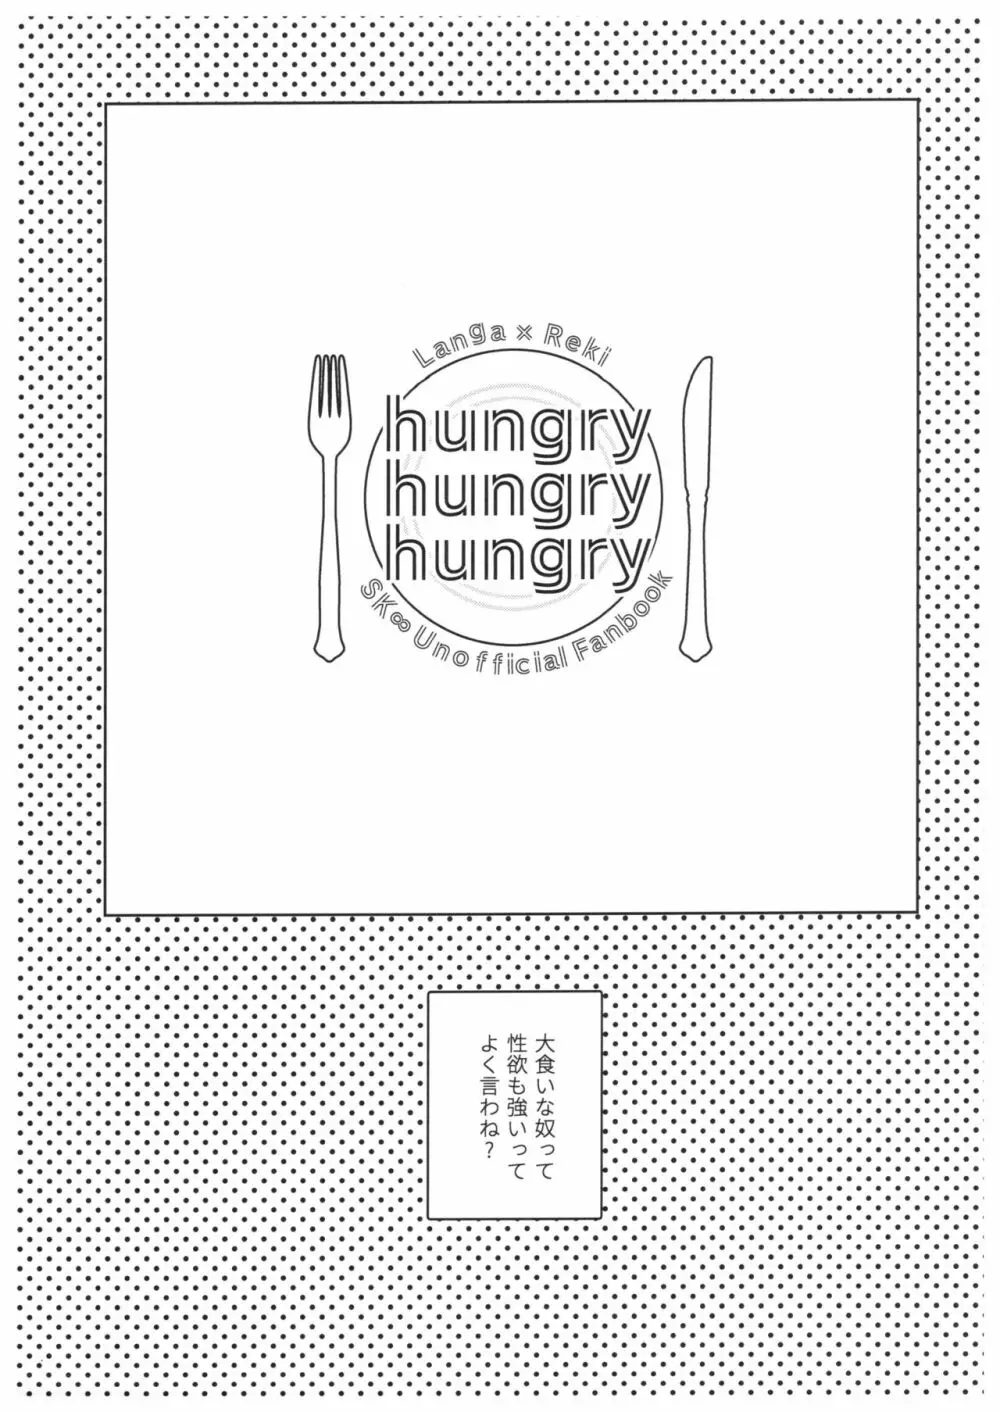 hungry hungry hungry Page.4